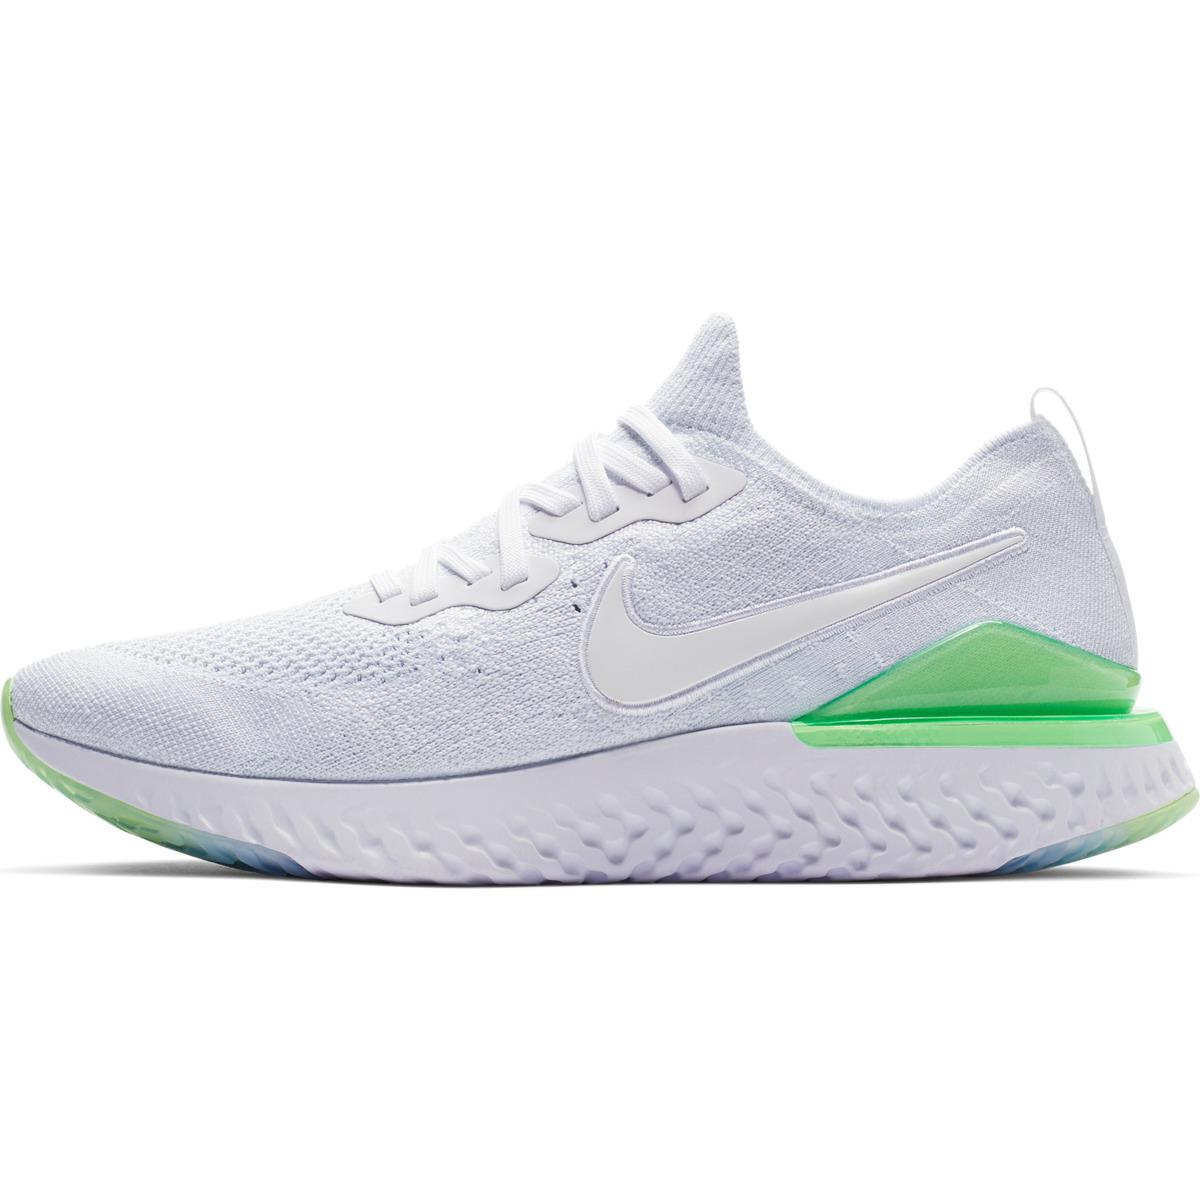 El Corte Ingles Nike Epic React Clearance Sale, UP TO 62% OFF |  www.istruzionepotenza.it